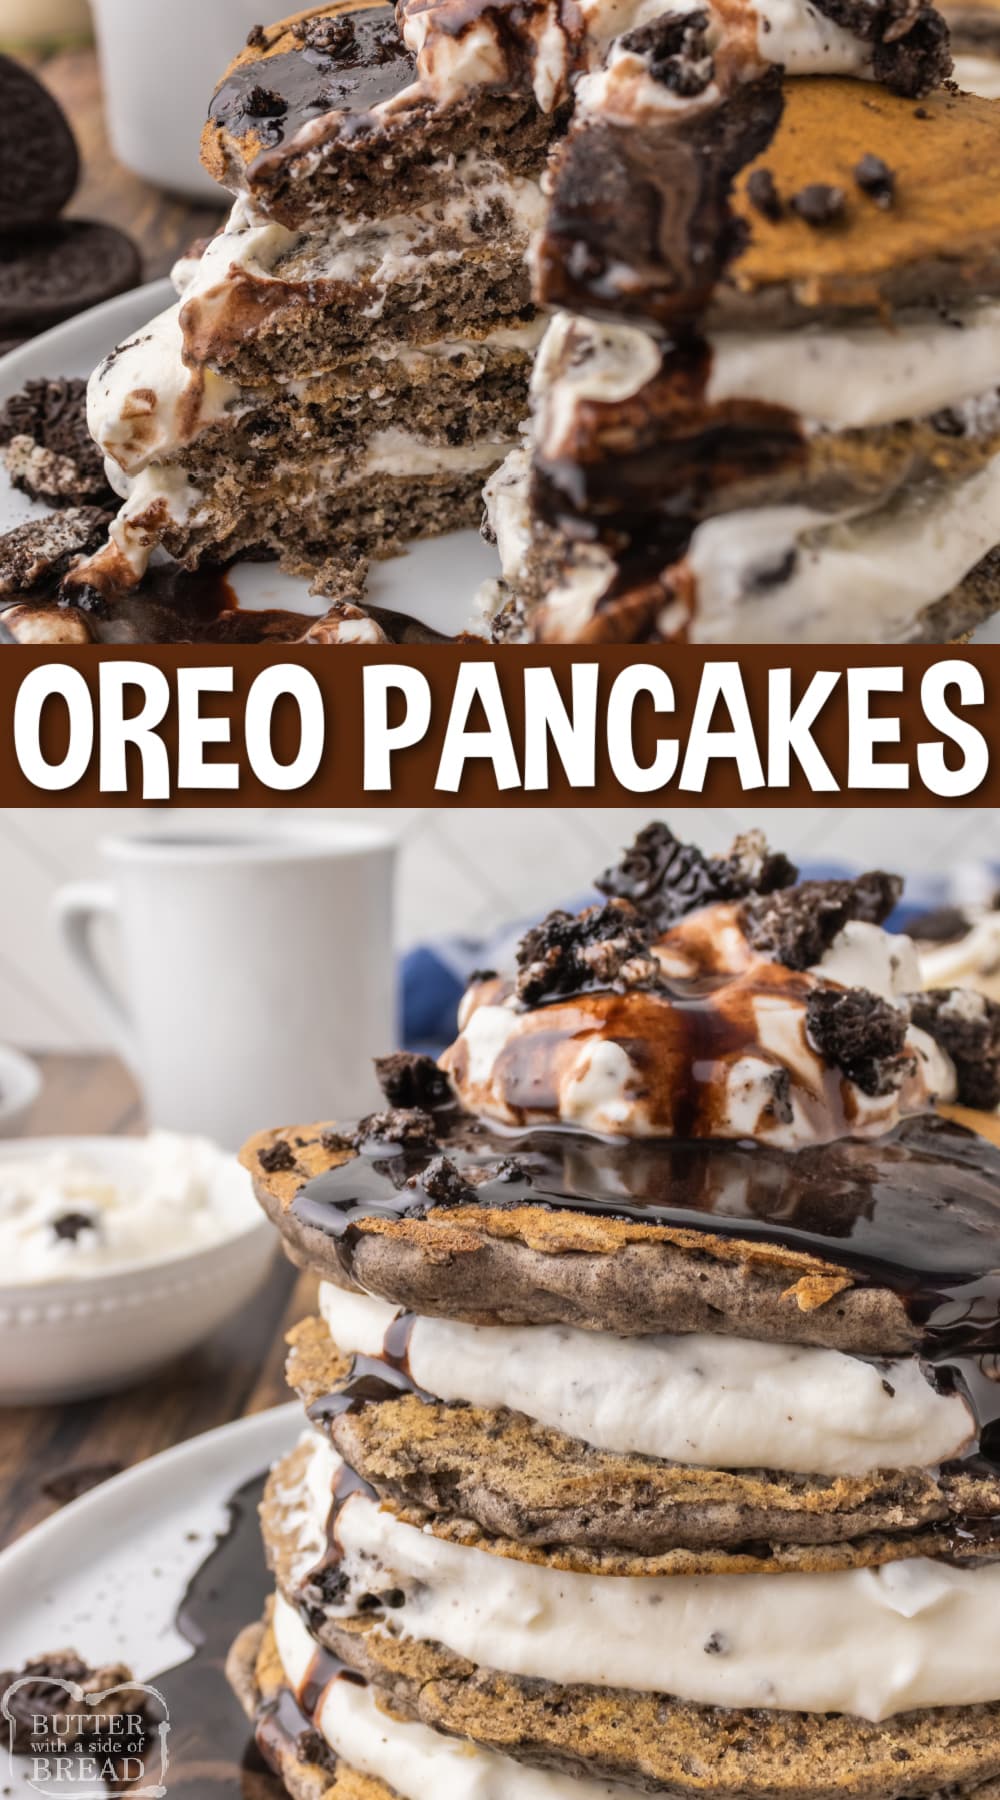 Oreo Pancakes are a delicious twist on the classic breakfast favorite. These light and fluffy pancakes are made with crushed Oreos in the batter, then topped with whipped cream and more crushed Oreos!